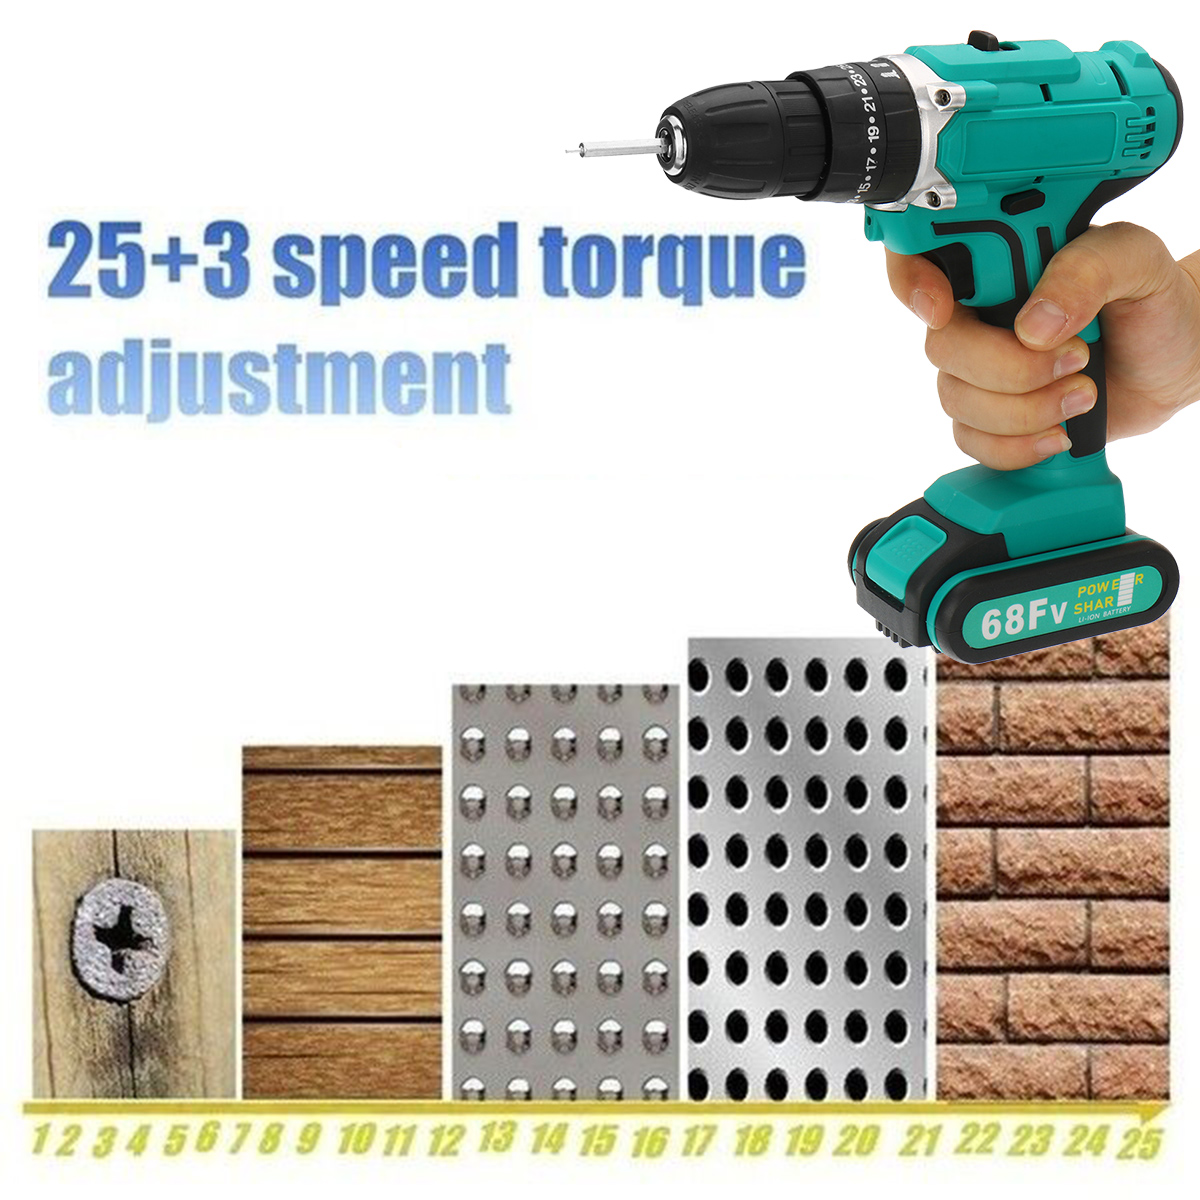 68FV-Household-Lithium-Electric-Screwdriver-2-Speed-Impact-Power-Drills-Rechargeable-Drill-Driver-W--1560586-5